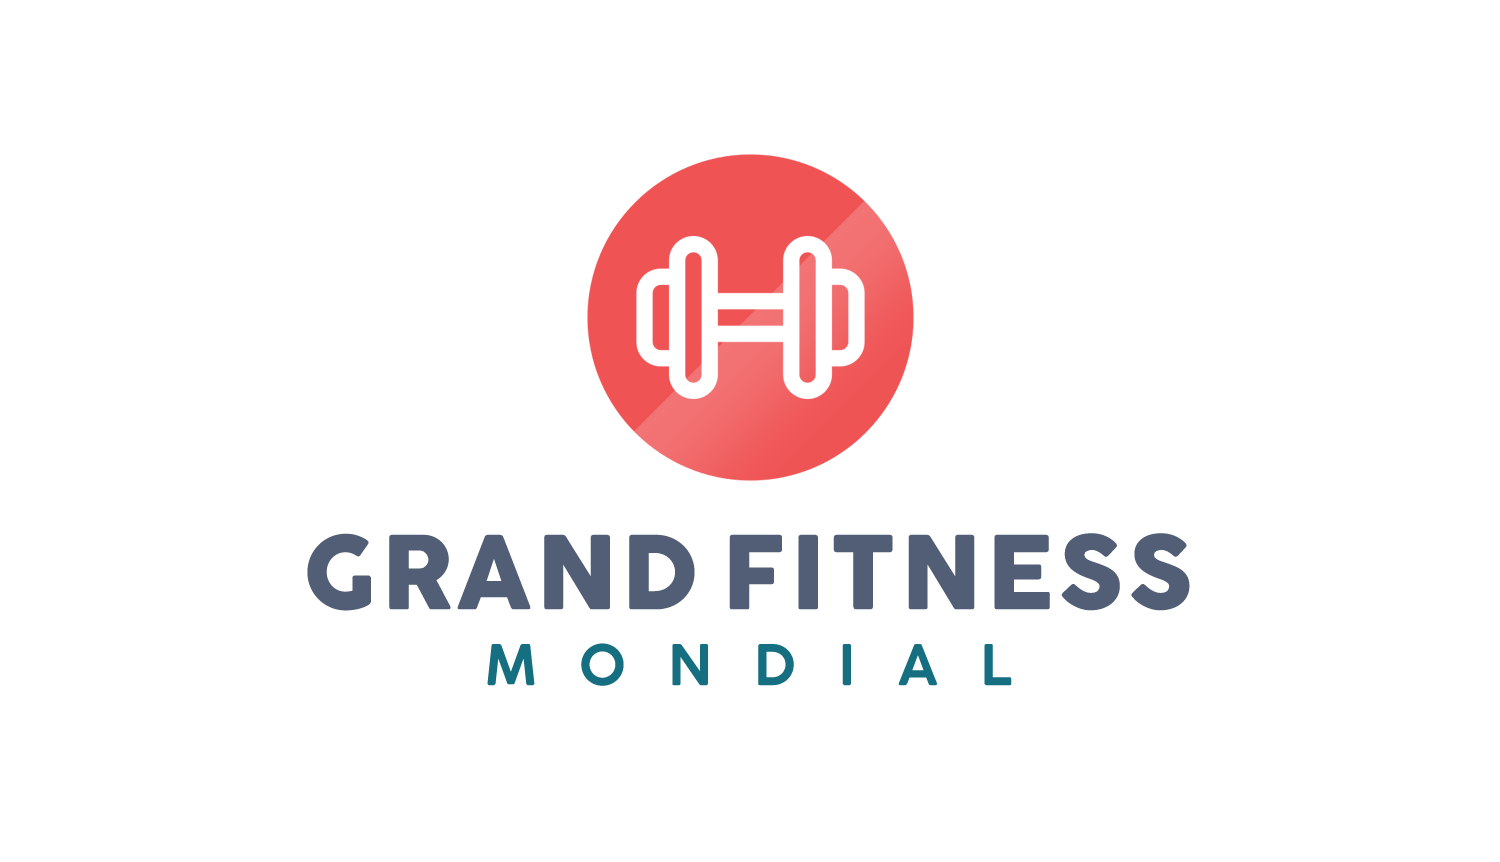 The Grand Fitness Mondial